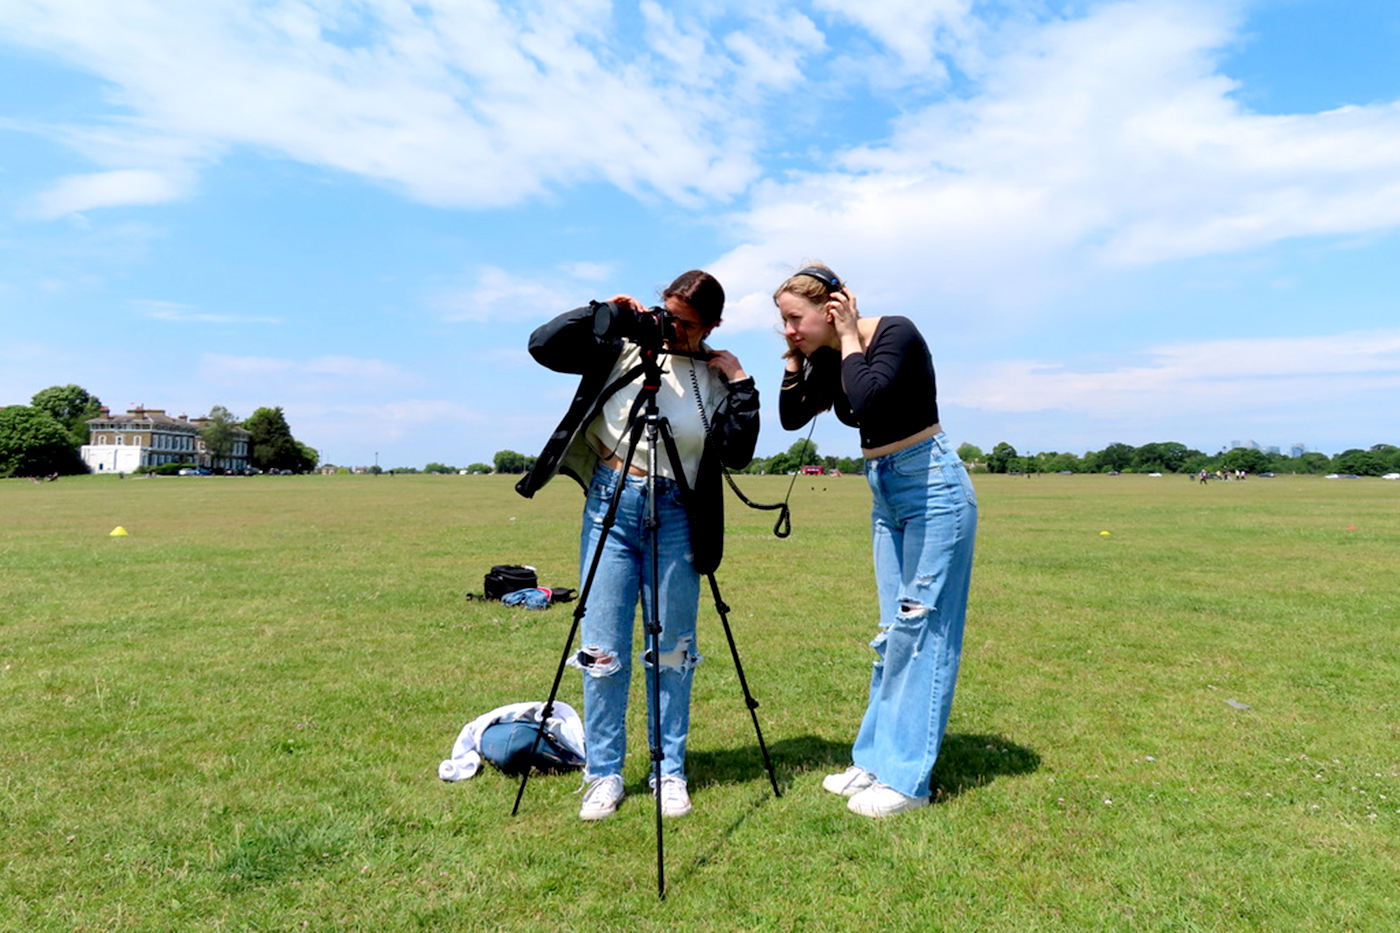 Students filming on an open green field; one is looking through the camera and the other is listening through headphones